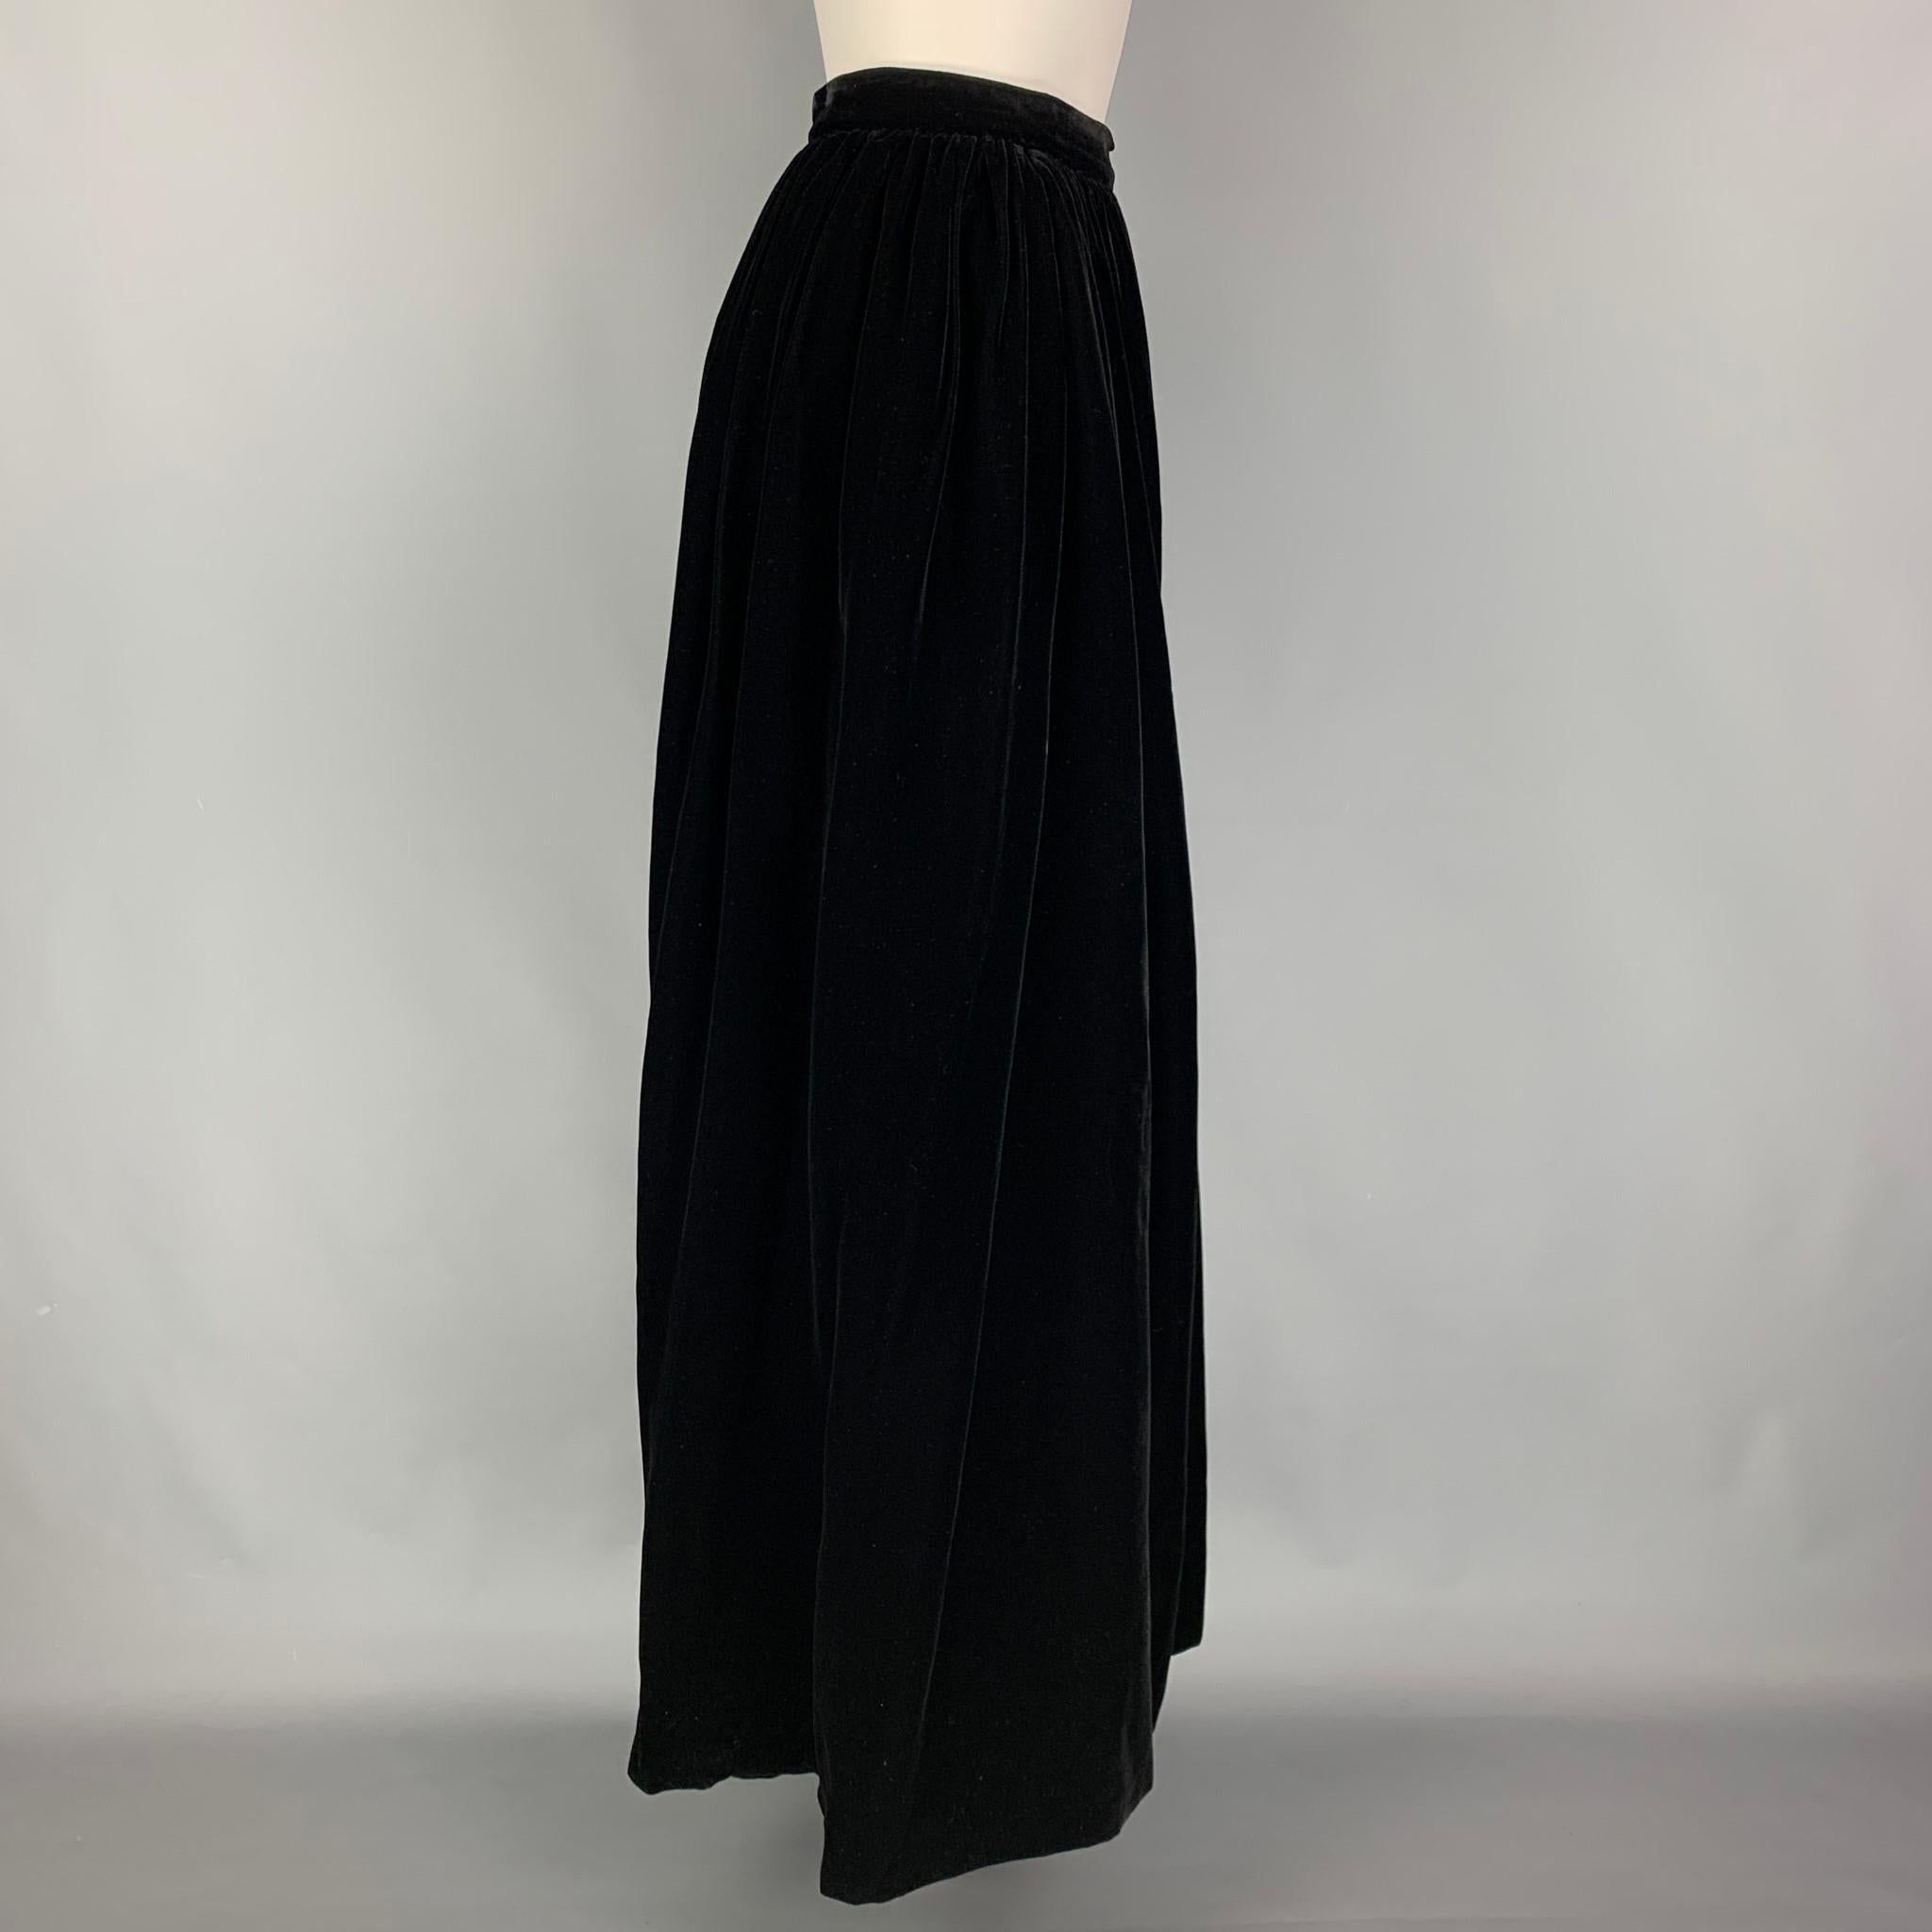 YVES SAINT LAURENT skirt comes in a black rayon featuring a pleated style and a zip up closure. Made in France. 

Very Good Pre-Owned Condition.
Marked: 44

Measurements:

Waist: 28 in.
Hip: 34 in.
Length: 44 in.